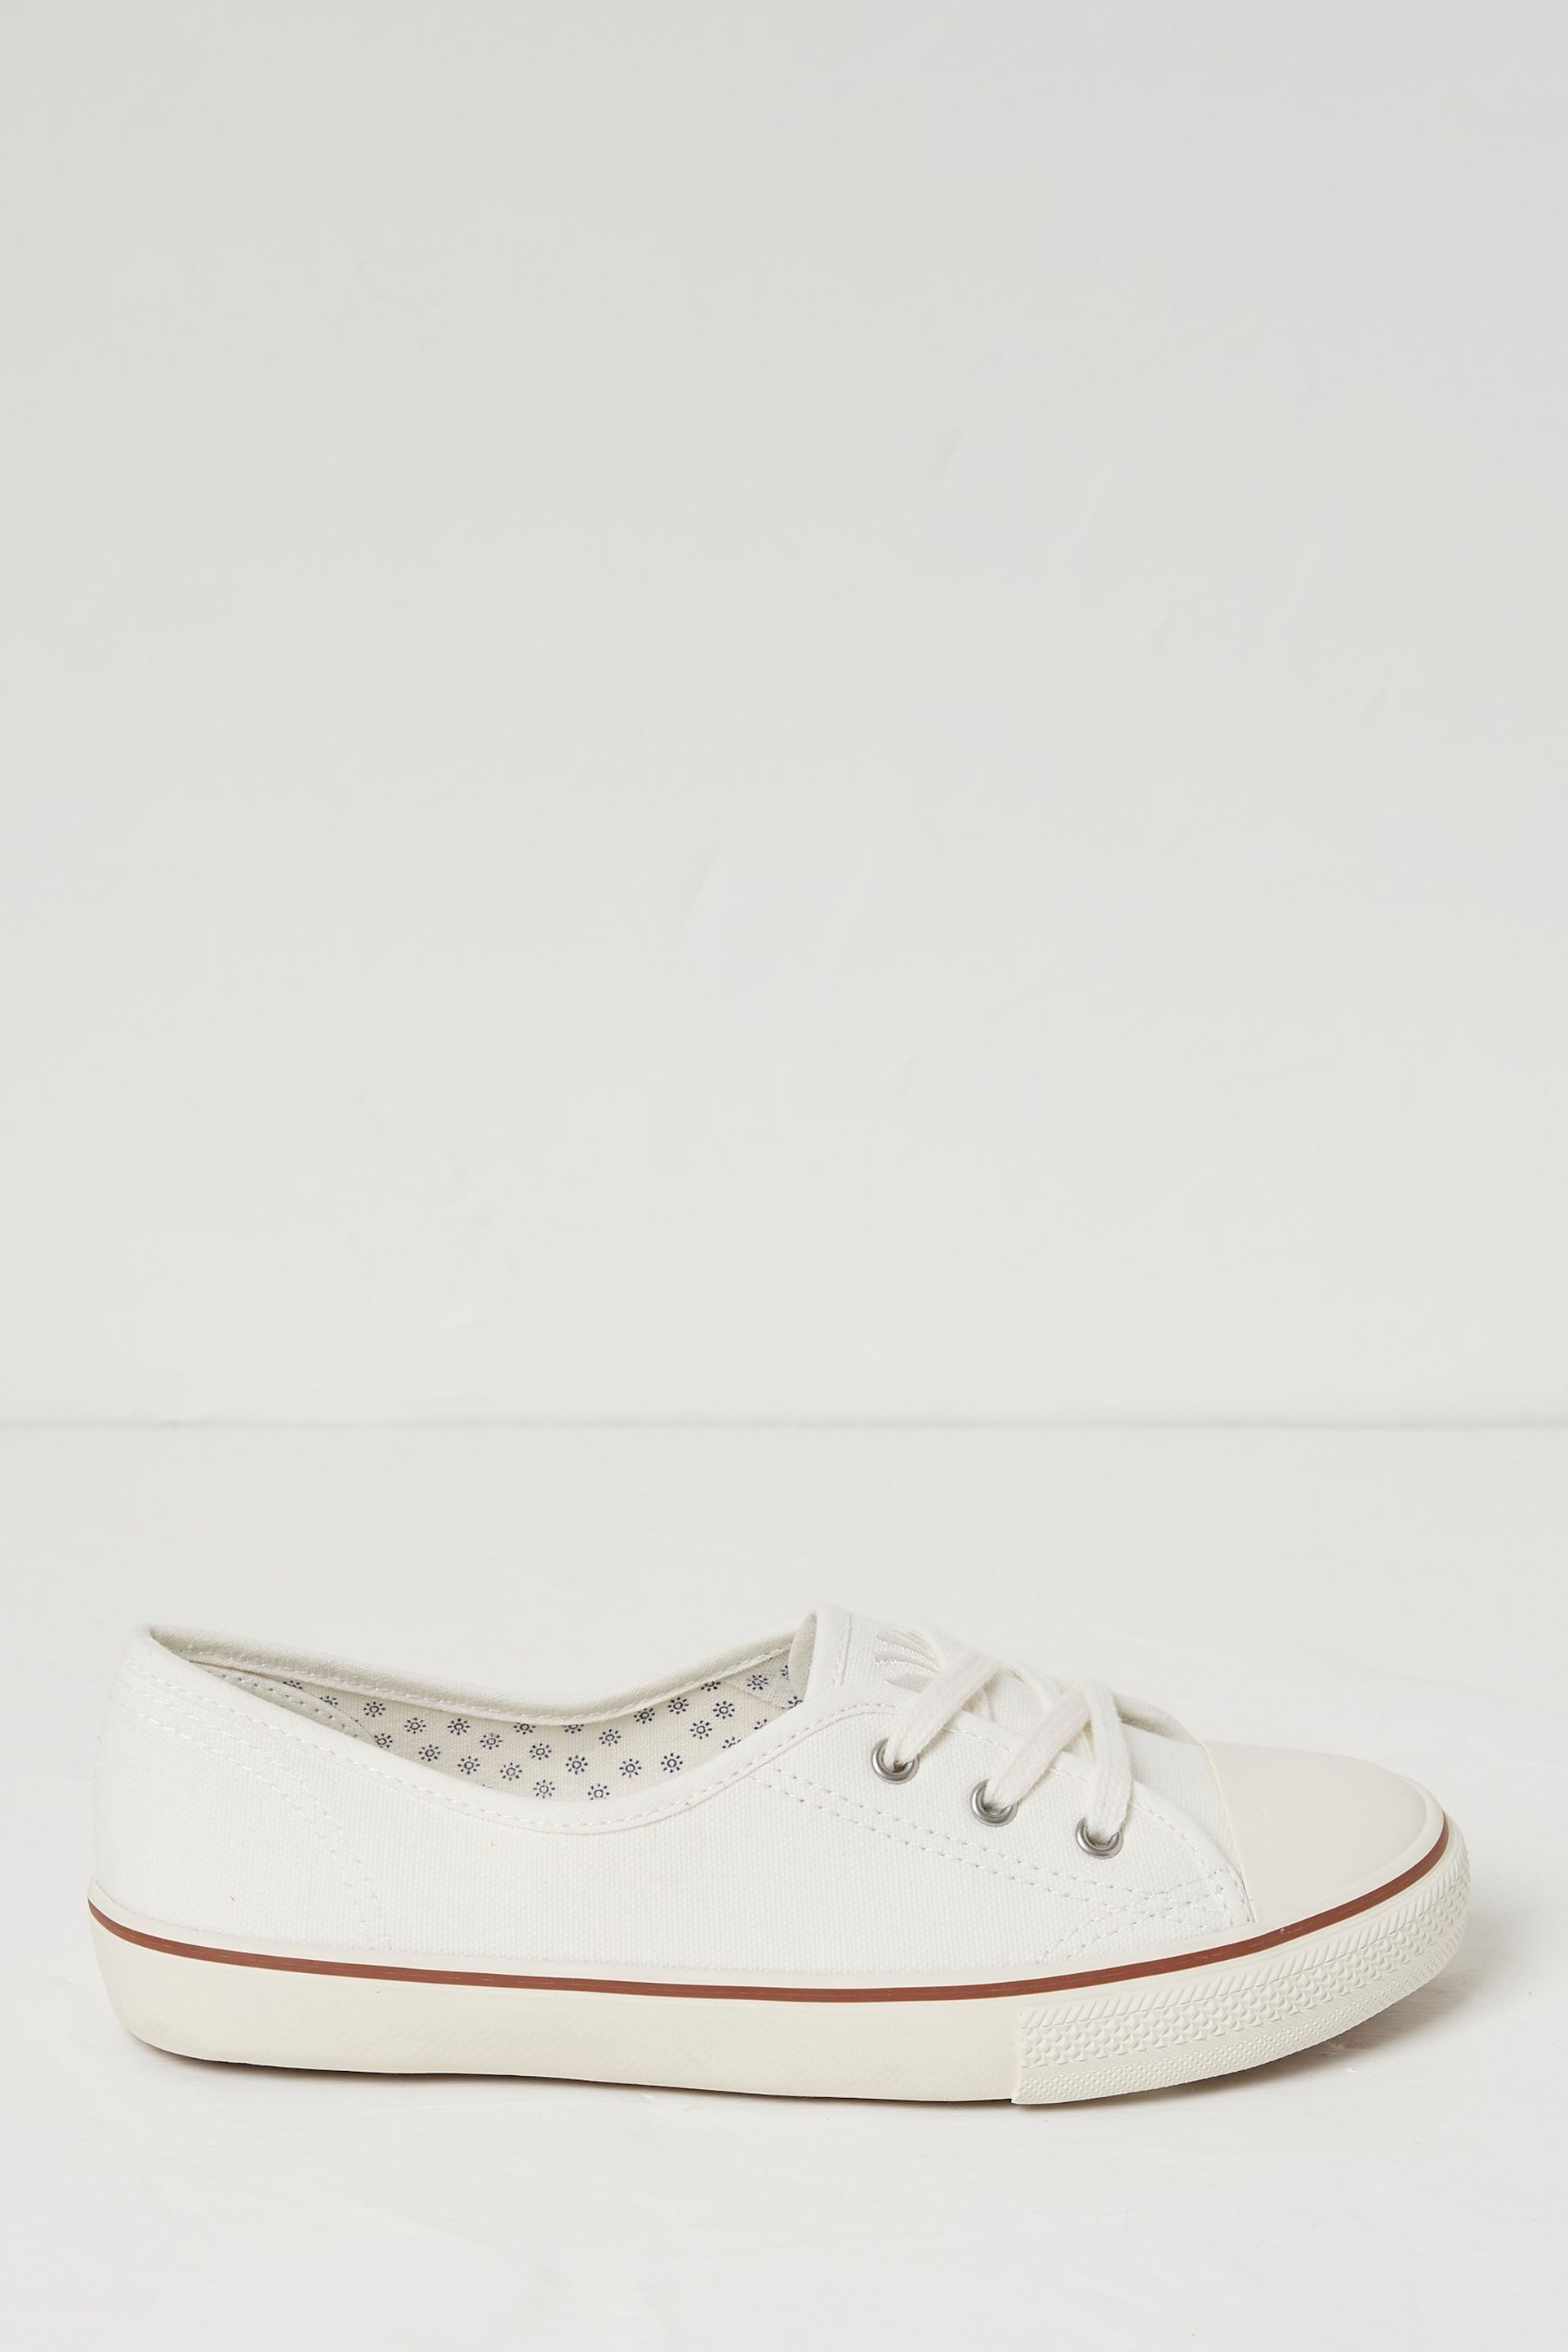 FatFace White Suzie Ballet Trainers - Image 1 of 3